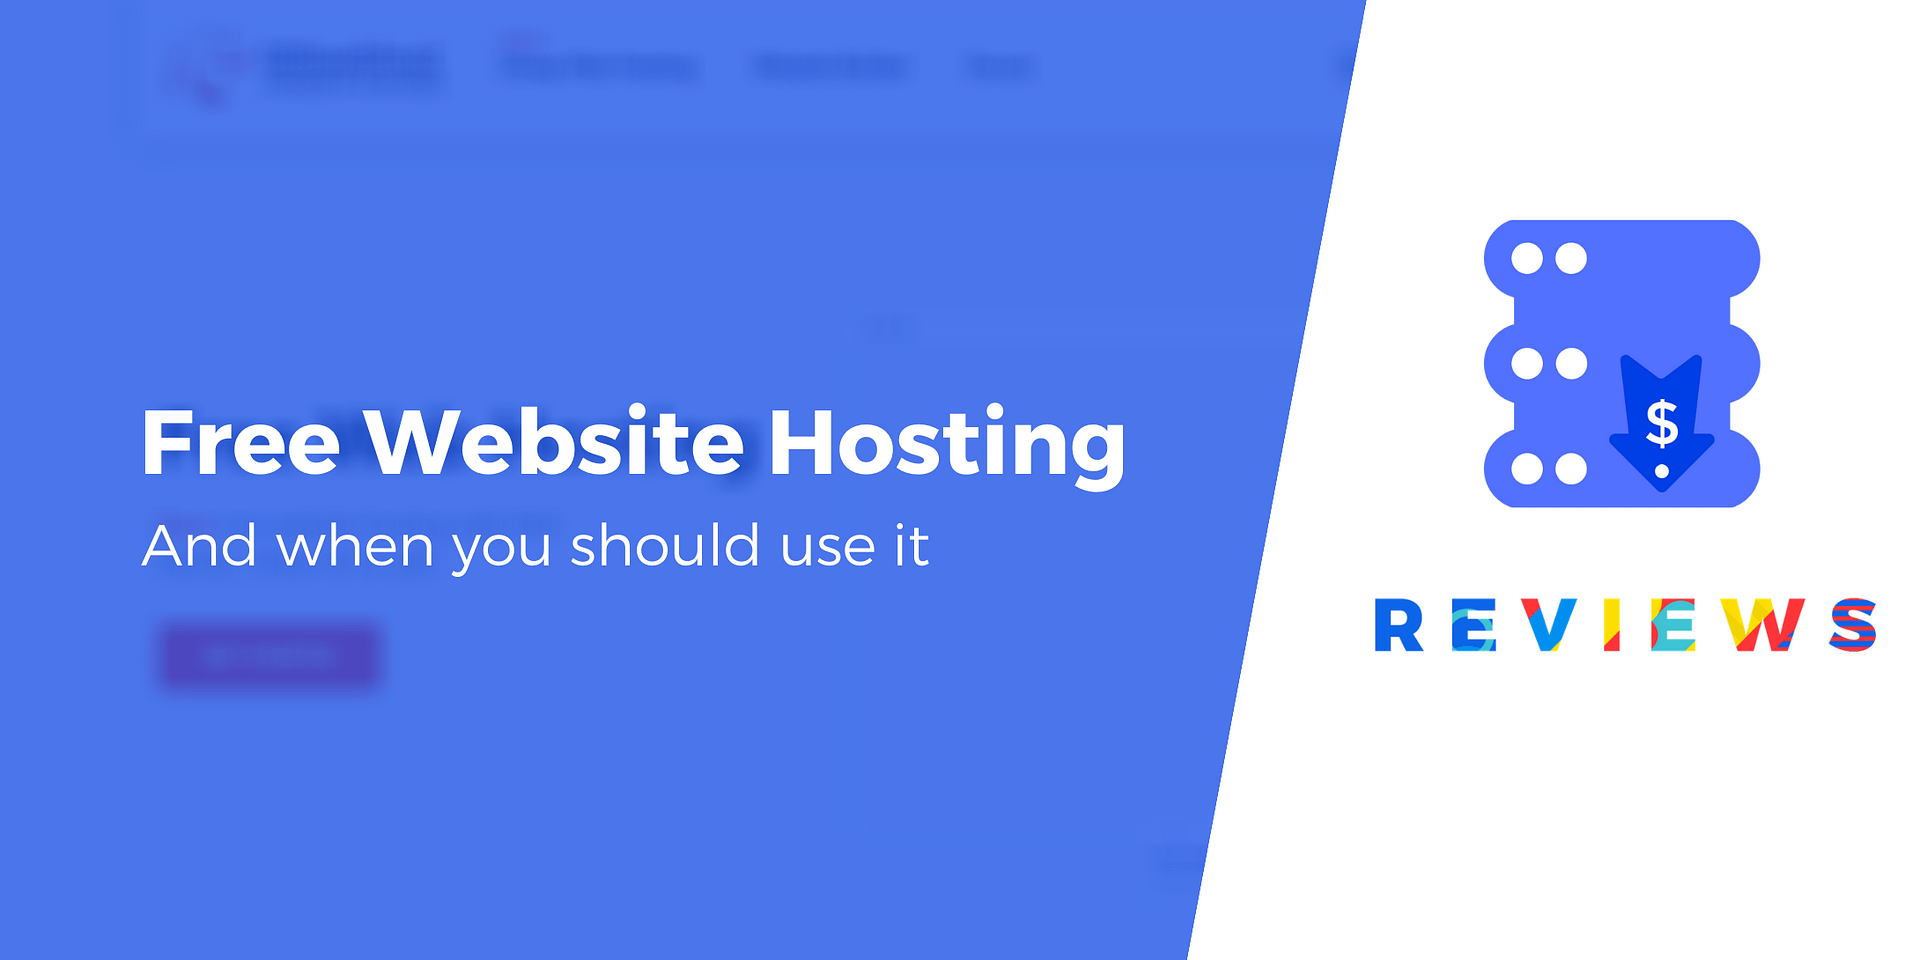 10 Free Website Hosting Services to Consider in 2023